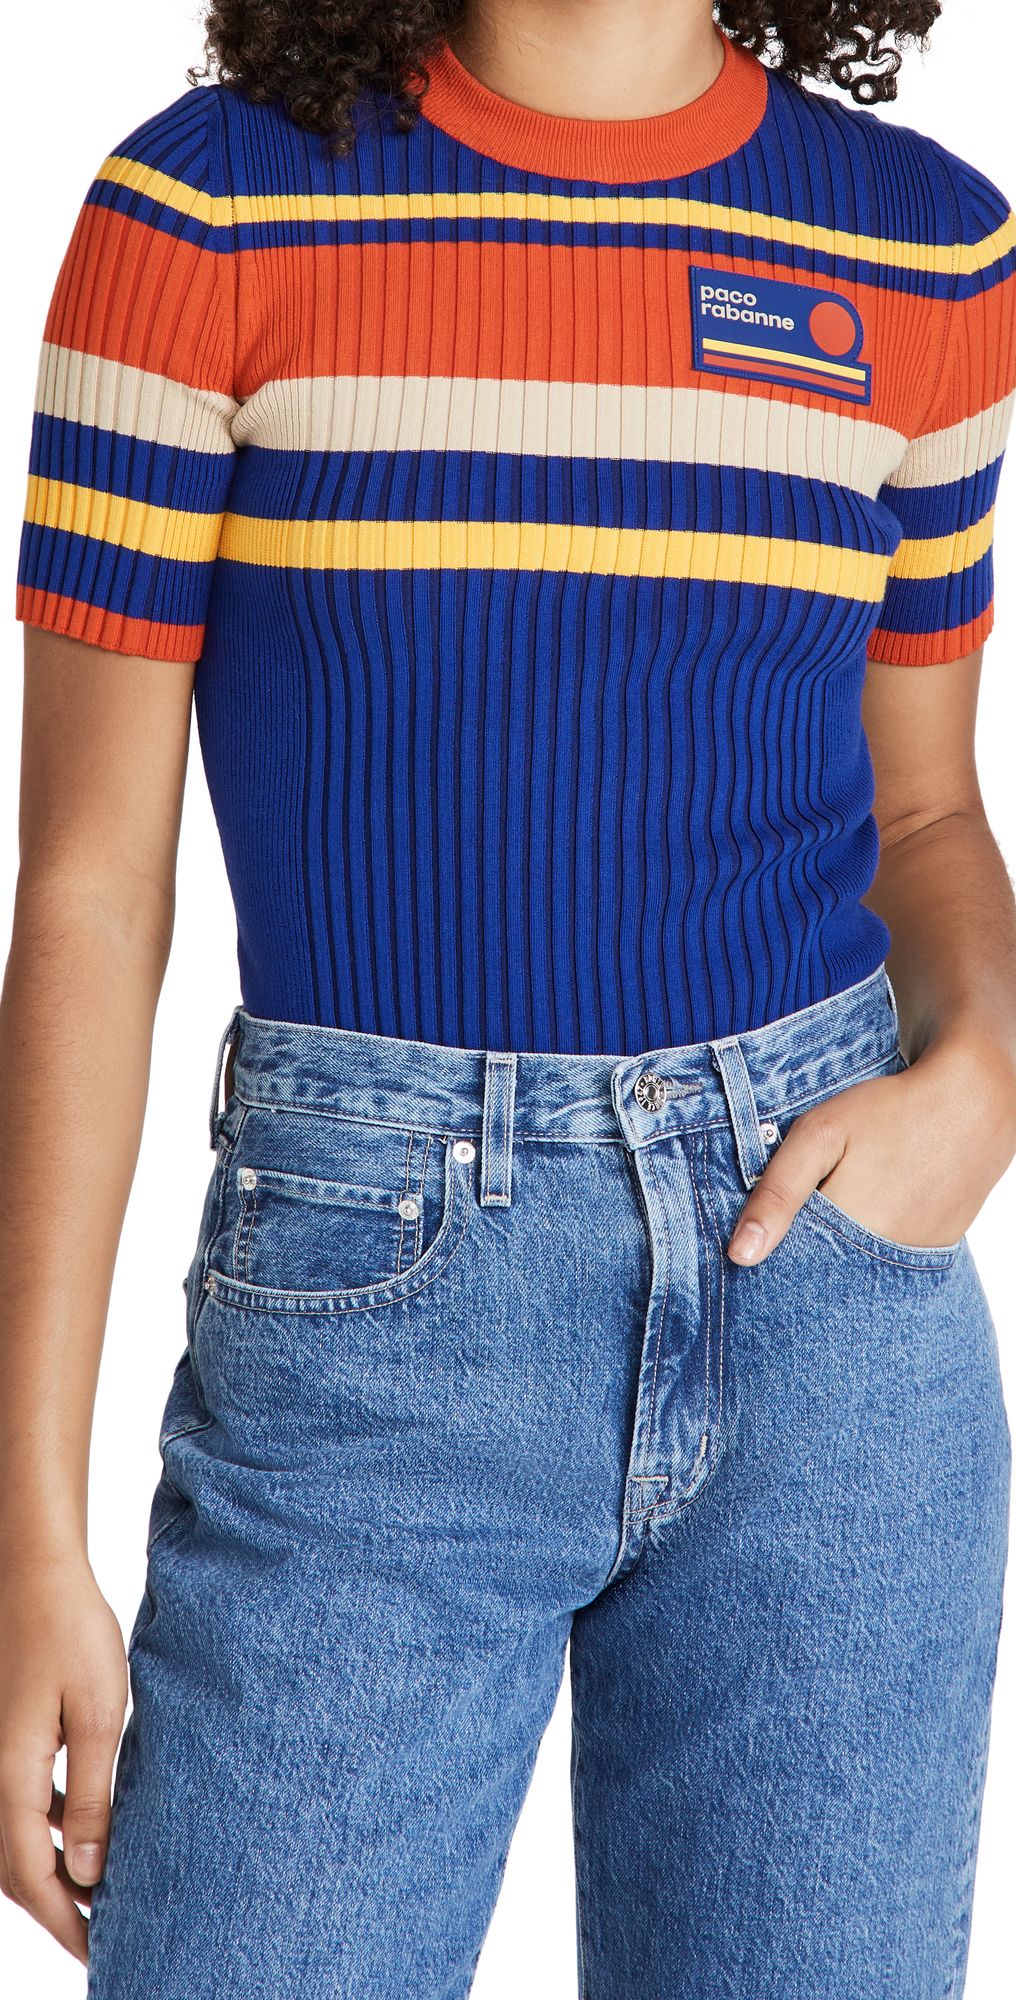 Paco Rabanne Tennis Stripes 70'S Ribbed Knit Top | Shopbop